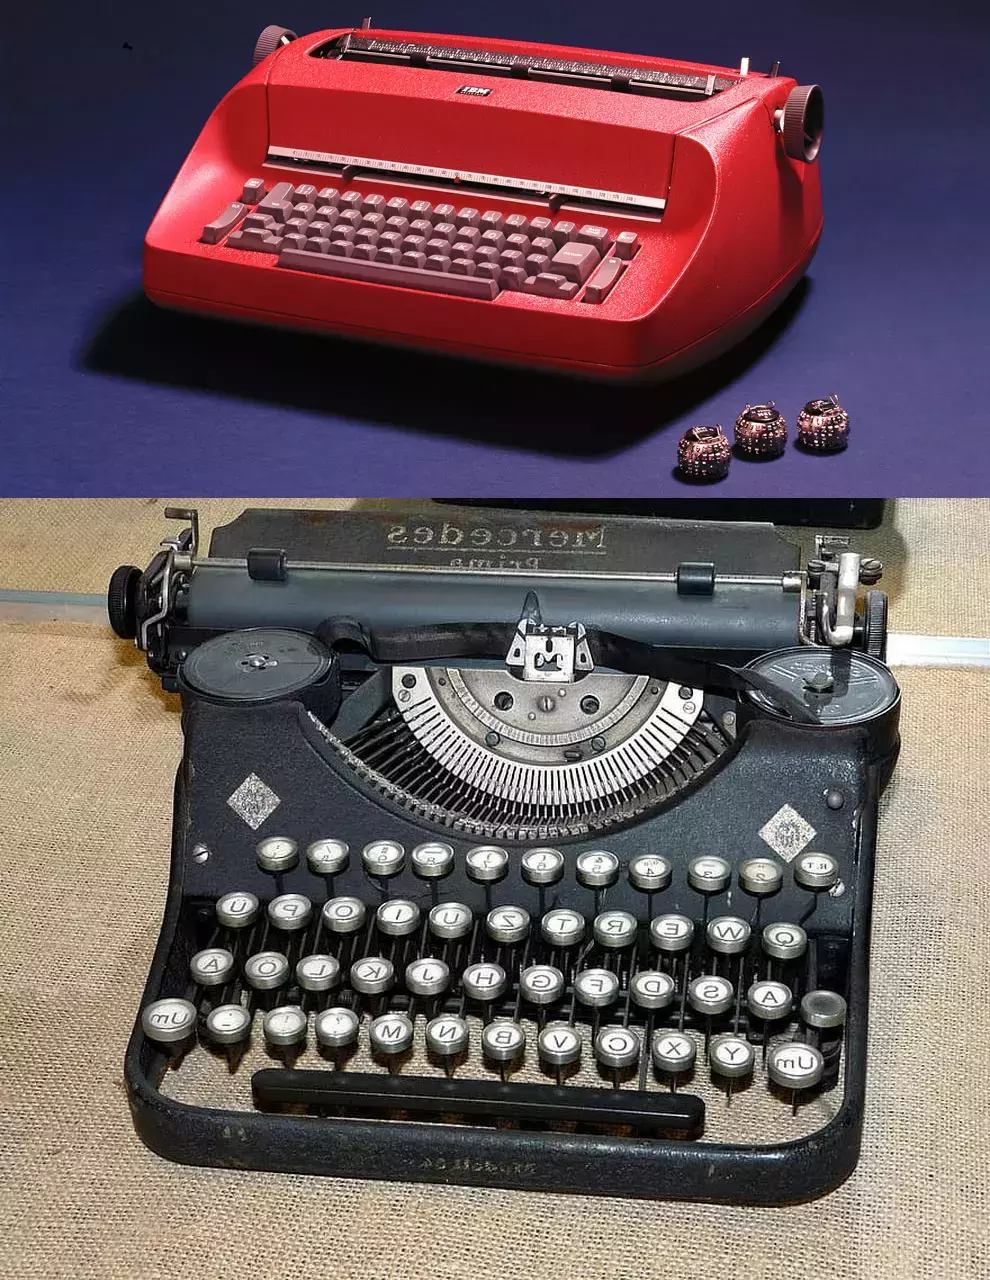 IBM Selectric typewriter compared to a mechanical typewriter used in Soviet embassies.